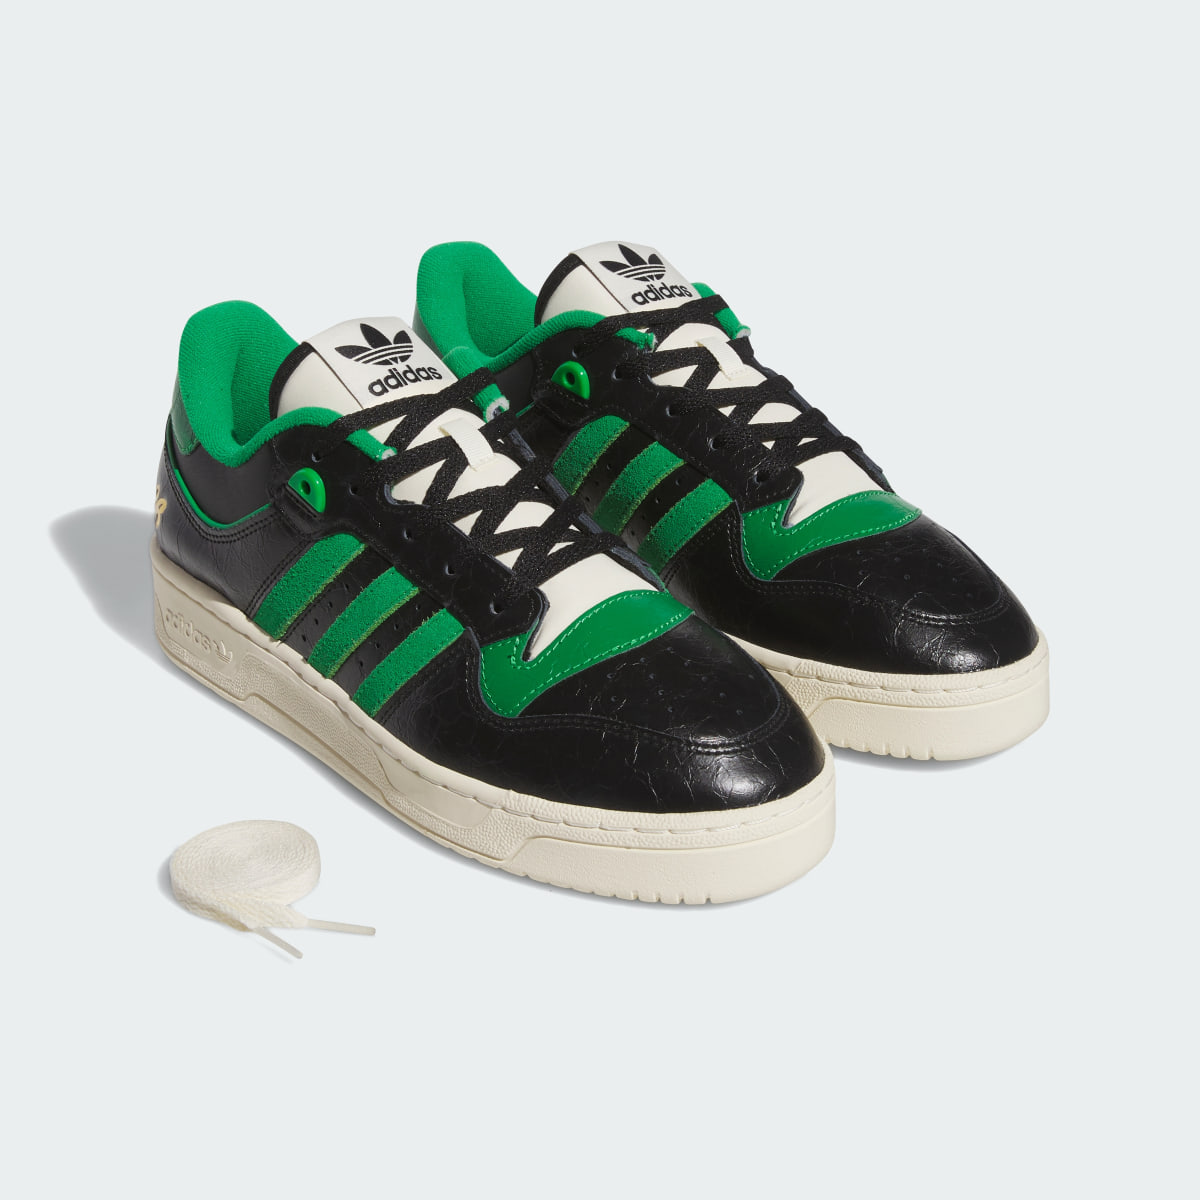 Adidas Rivalry 86 Low Schuh. 10